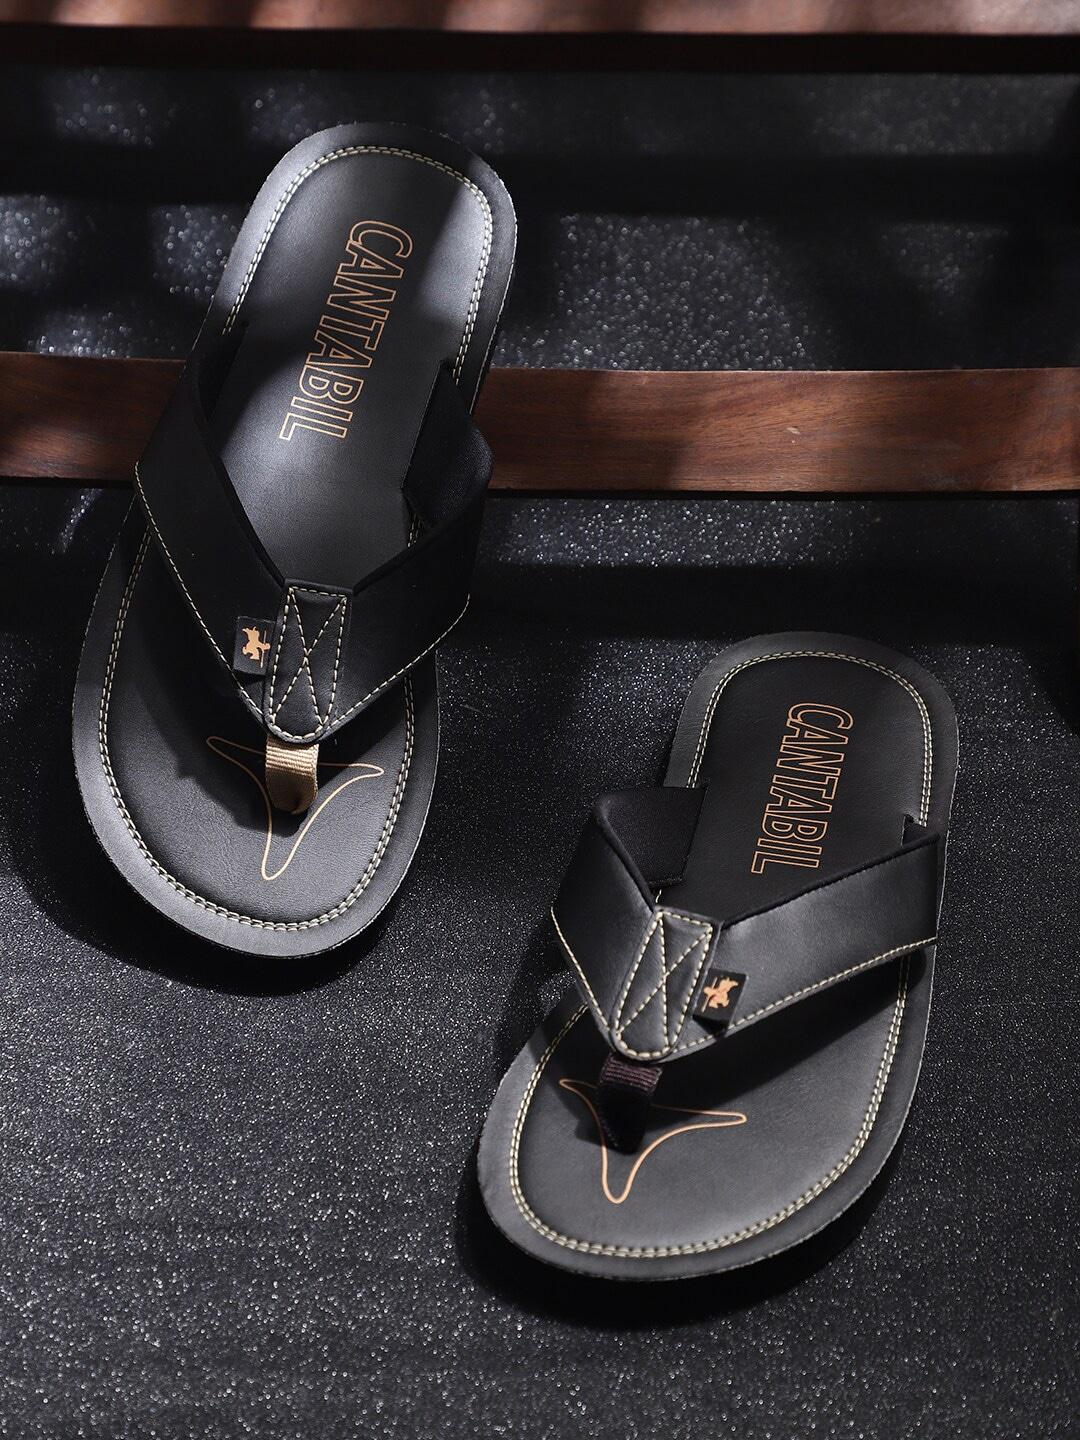 cantabil-men-typography-printed-rubber-thong-flip-flops